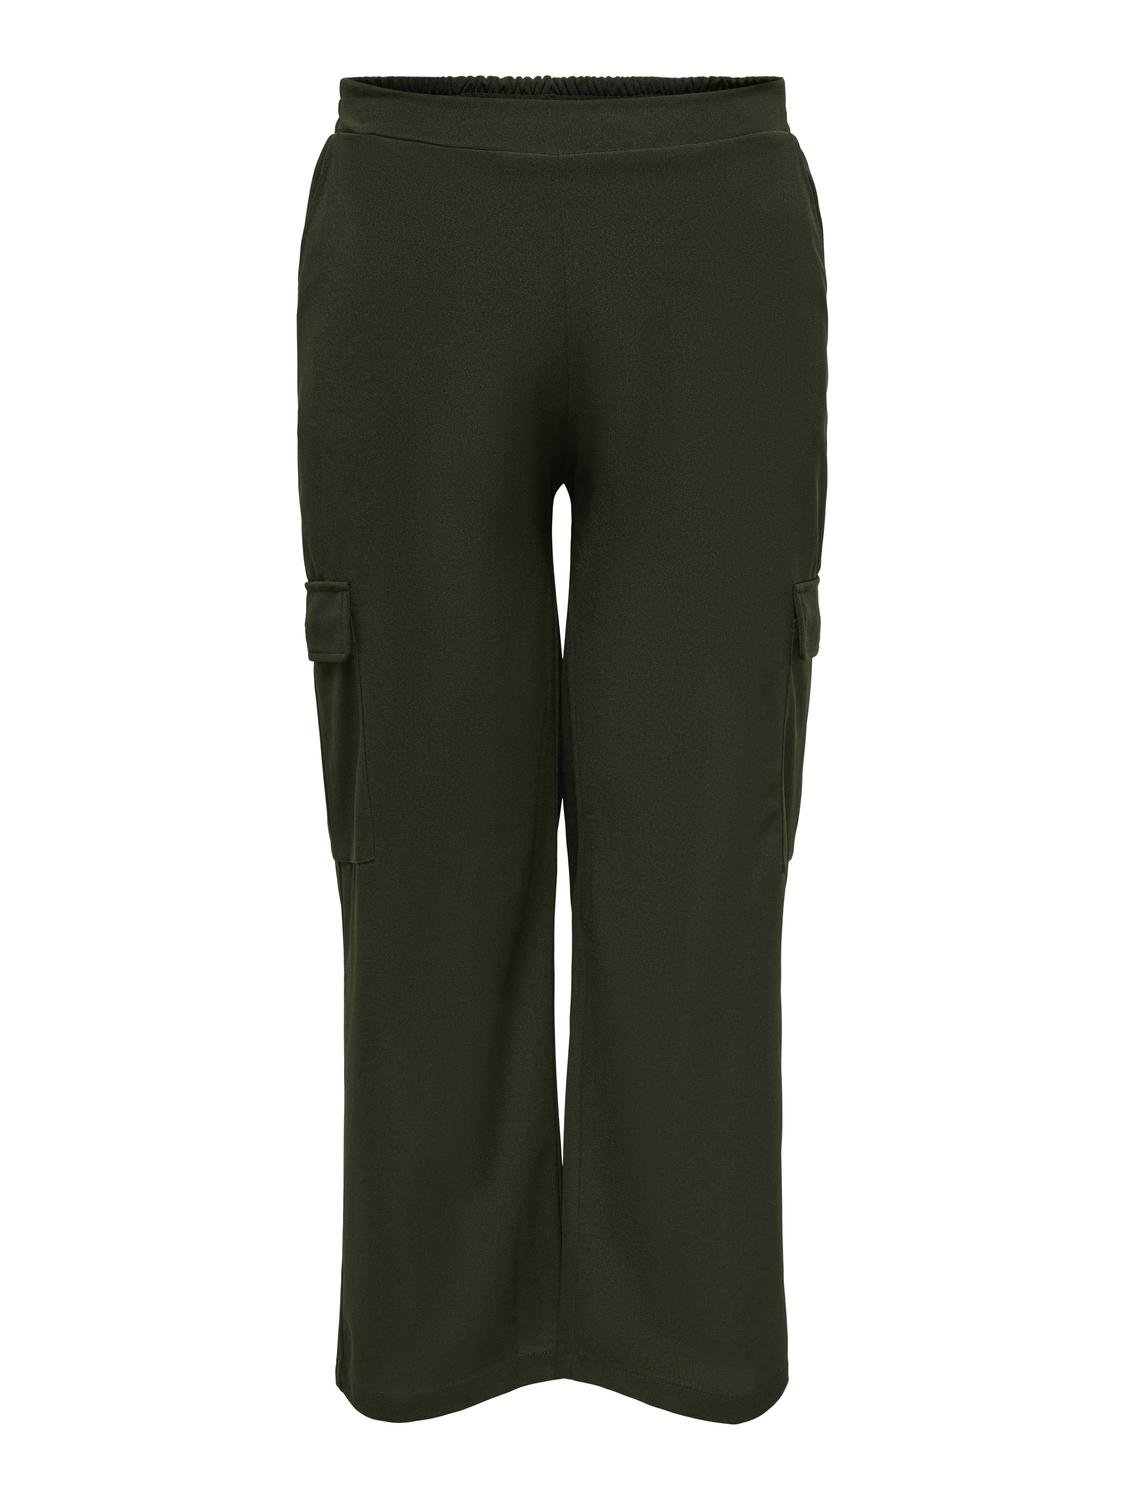 ONLY Curvy cargo trousers -Winter Moss - 15312311